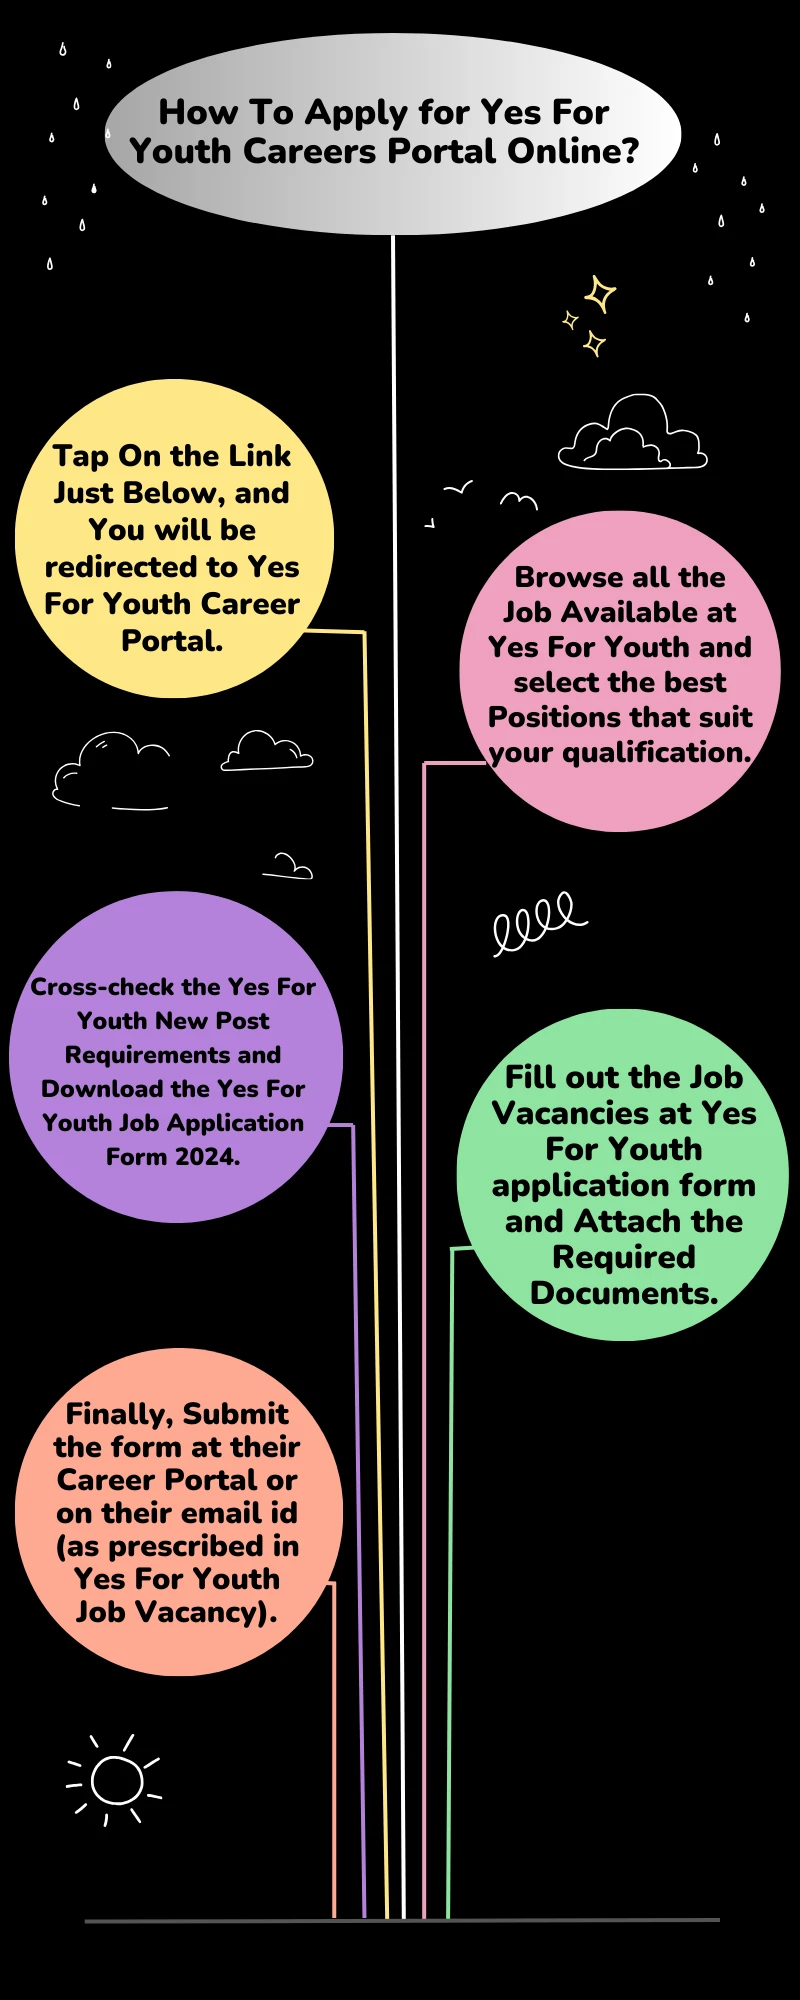 How To Apply for Yes For Youth Careers Portal Online?